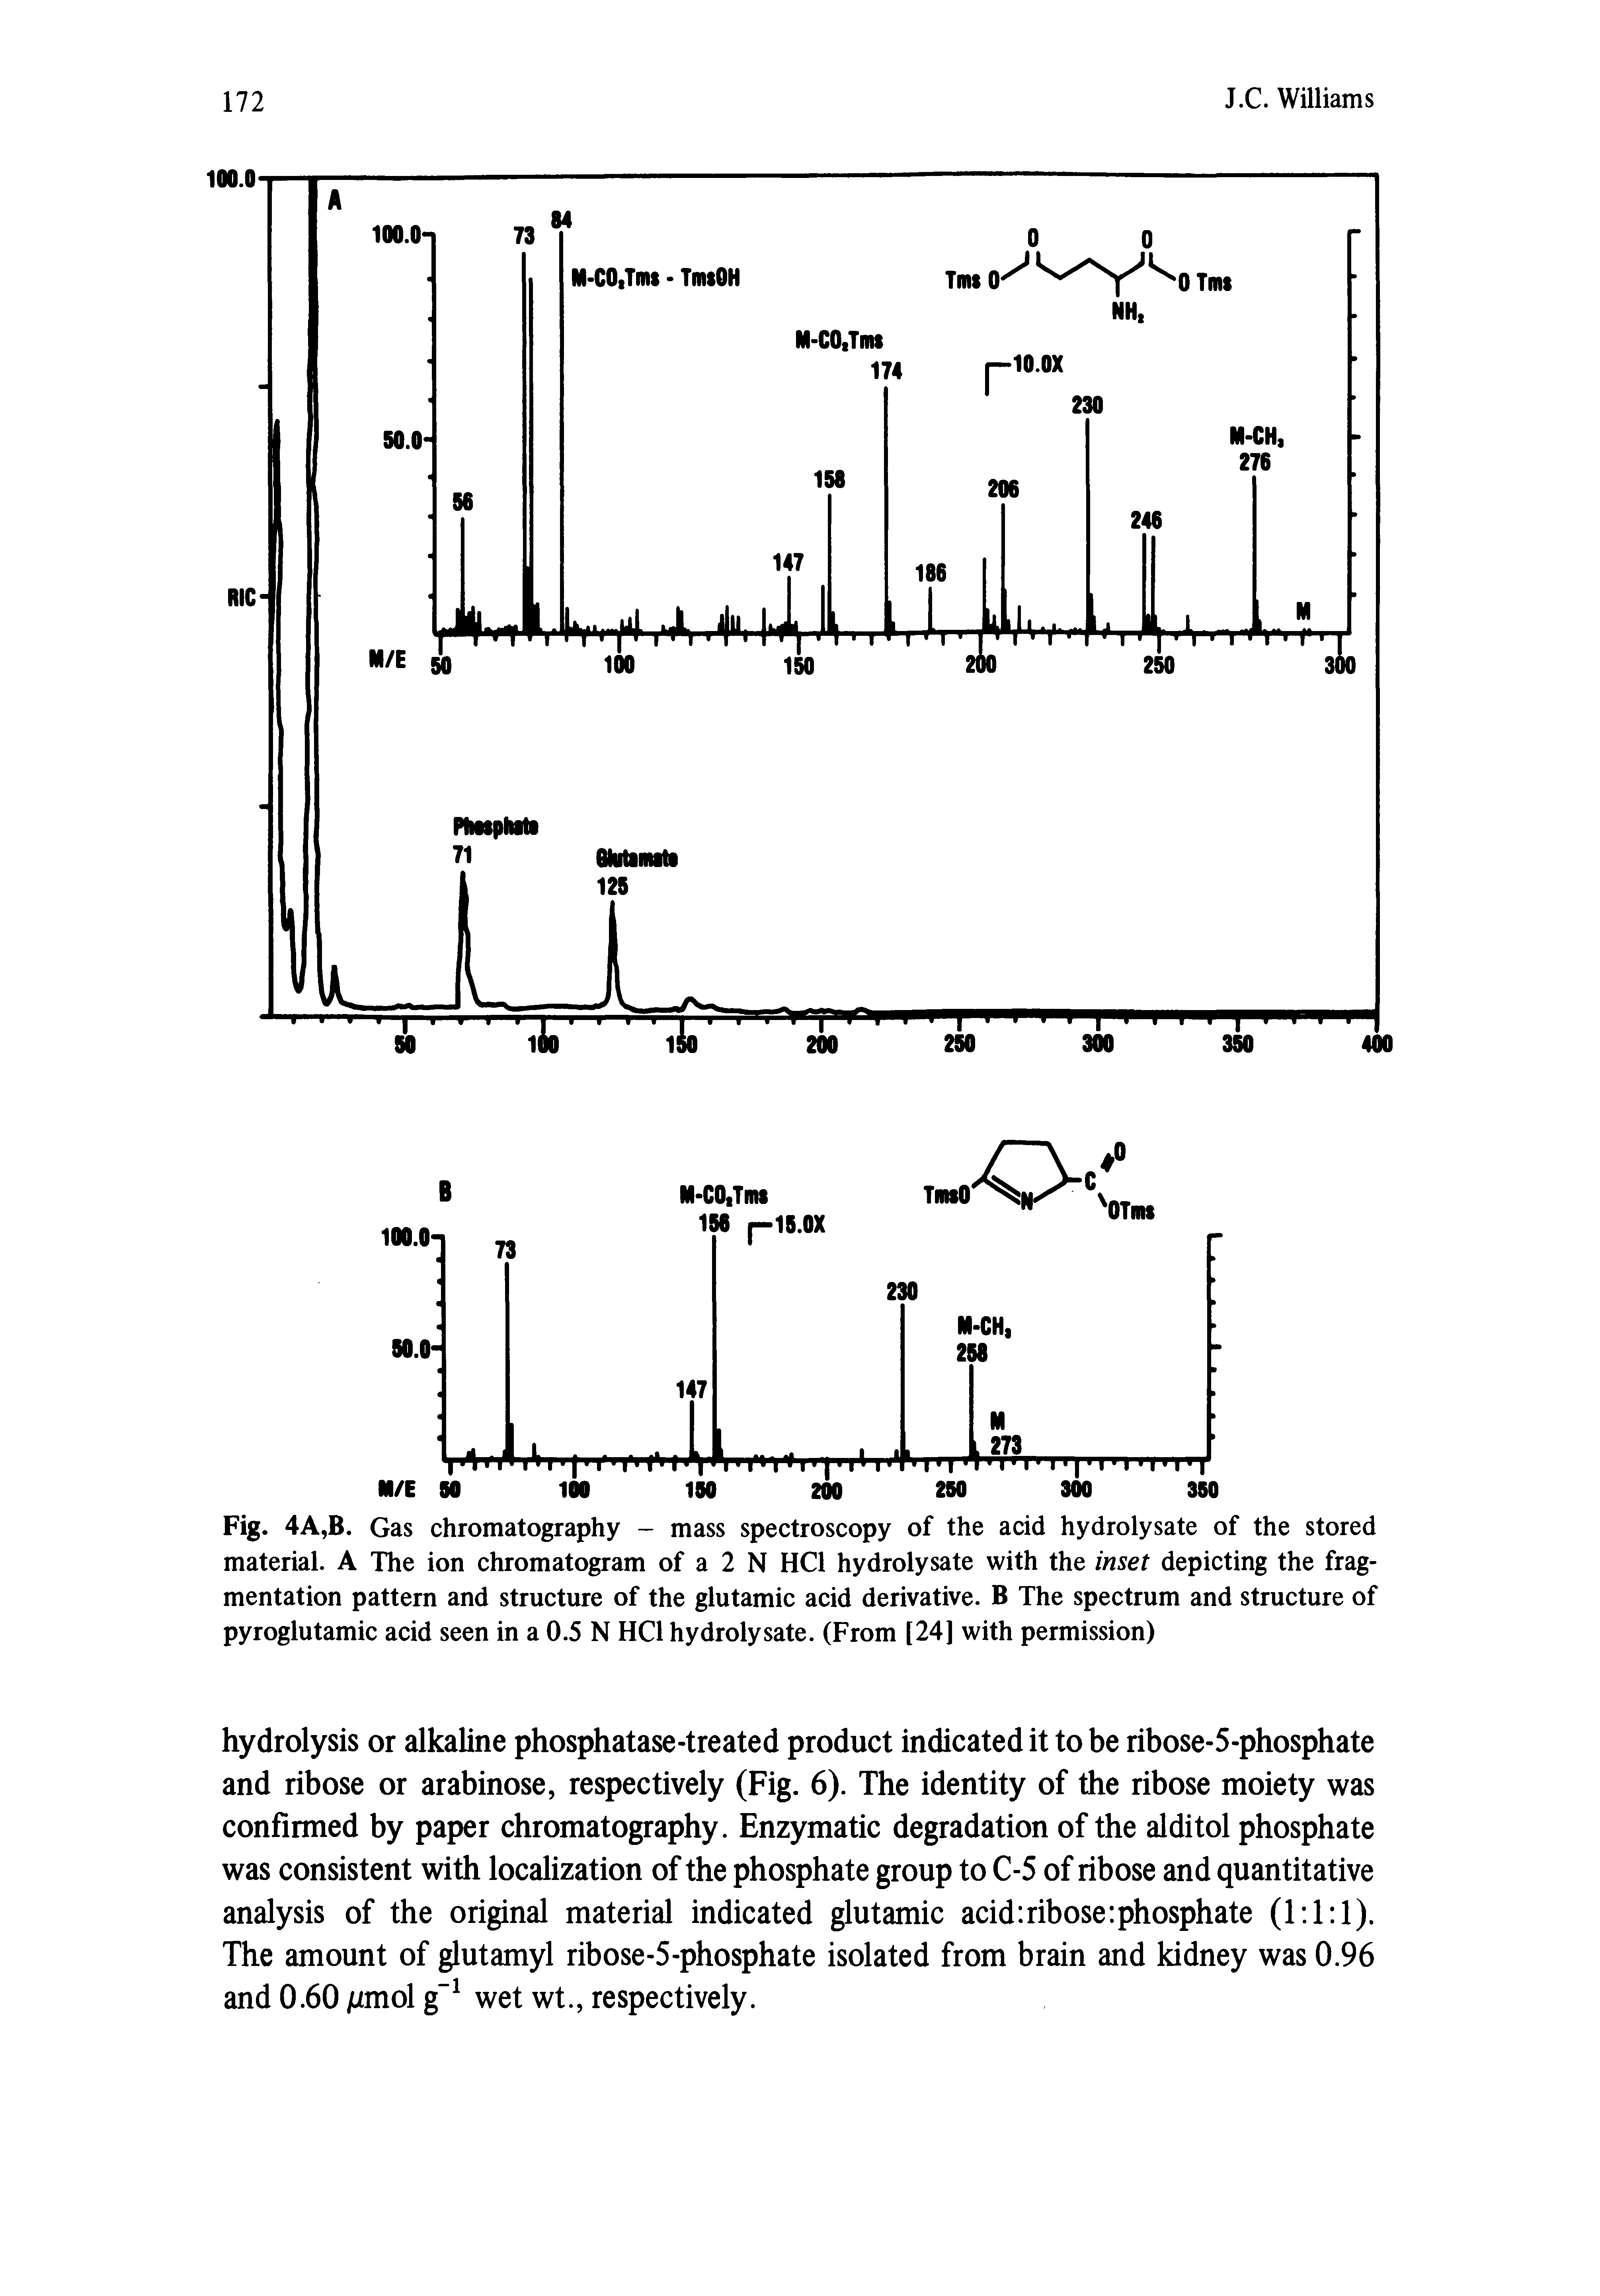 Fig. 4A,B. Gas chromatography - mass spectroscopy of the acid hydrolysate of the stored material. A The ion chromatogram of a 2 N HCl hydrolysate with the inset depicting the fragmentation pattern and structure of the glutamic acid derivative. B The spectrum and structure of pyroglutamic acid seen in a 0.5 N HCl hydrolysate. (From [24] with permission)...